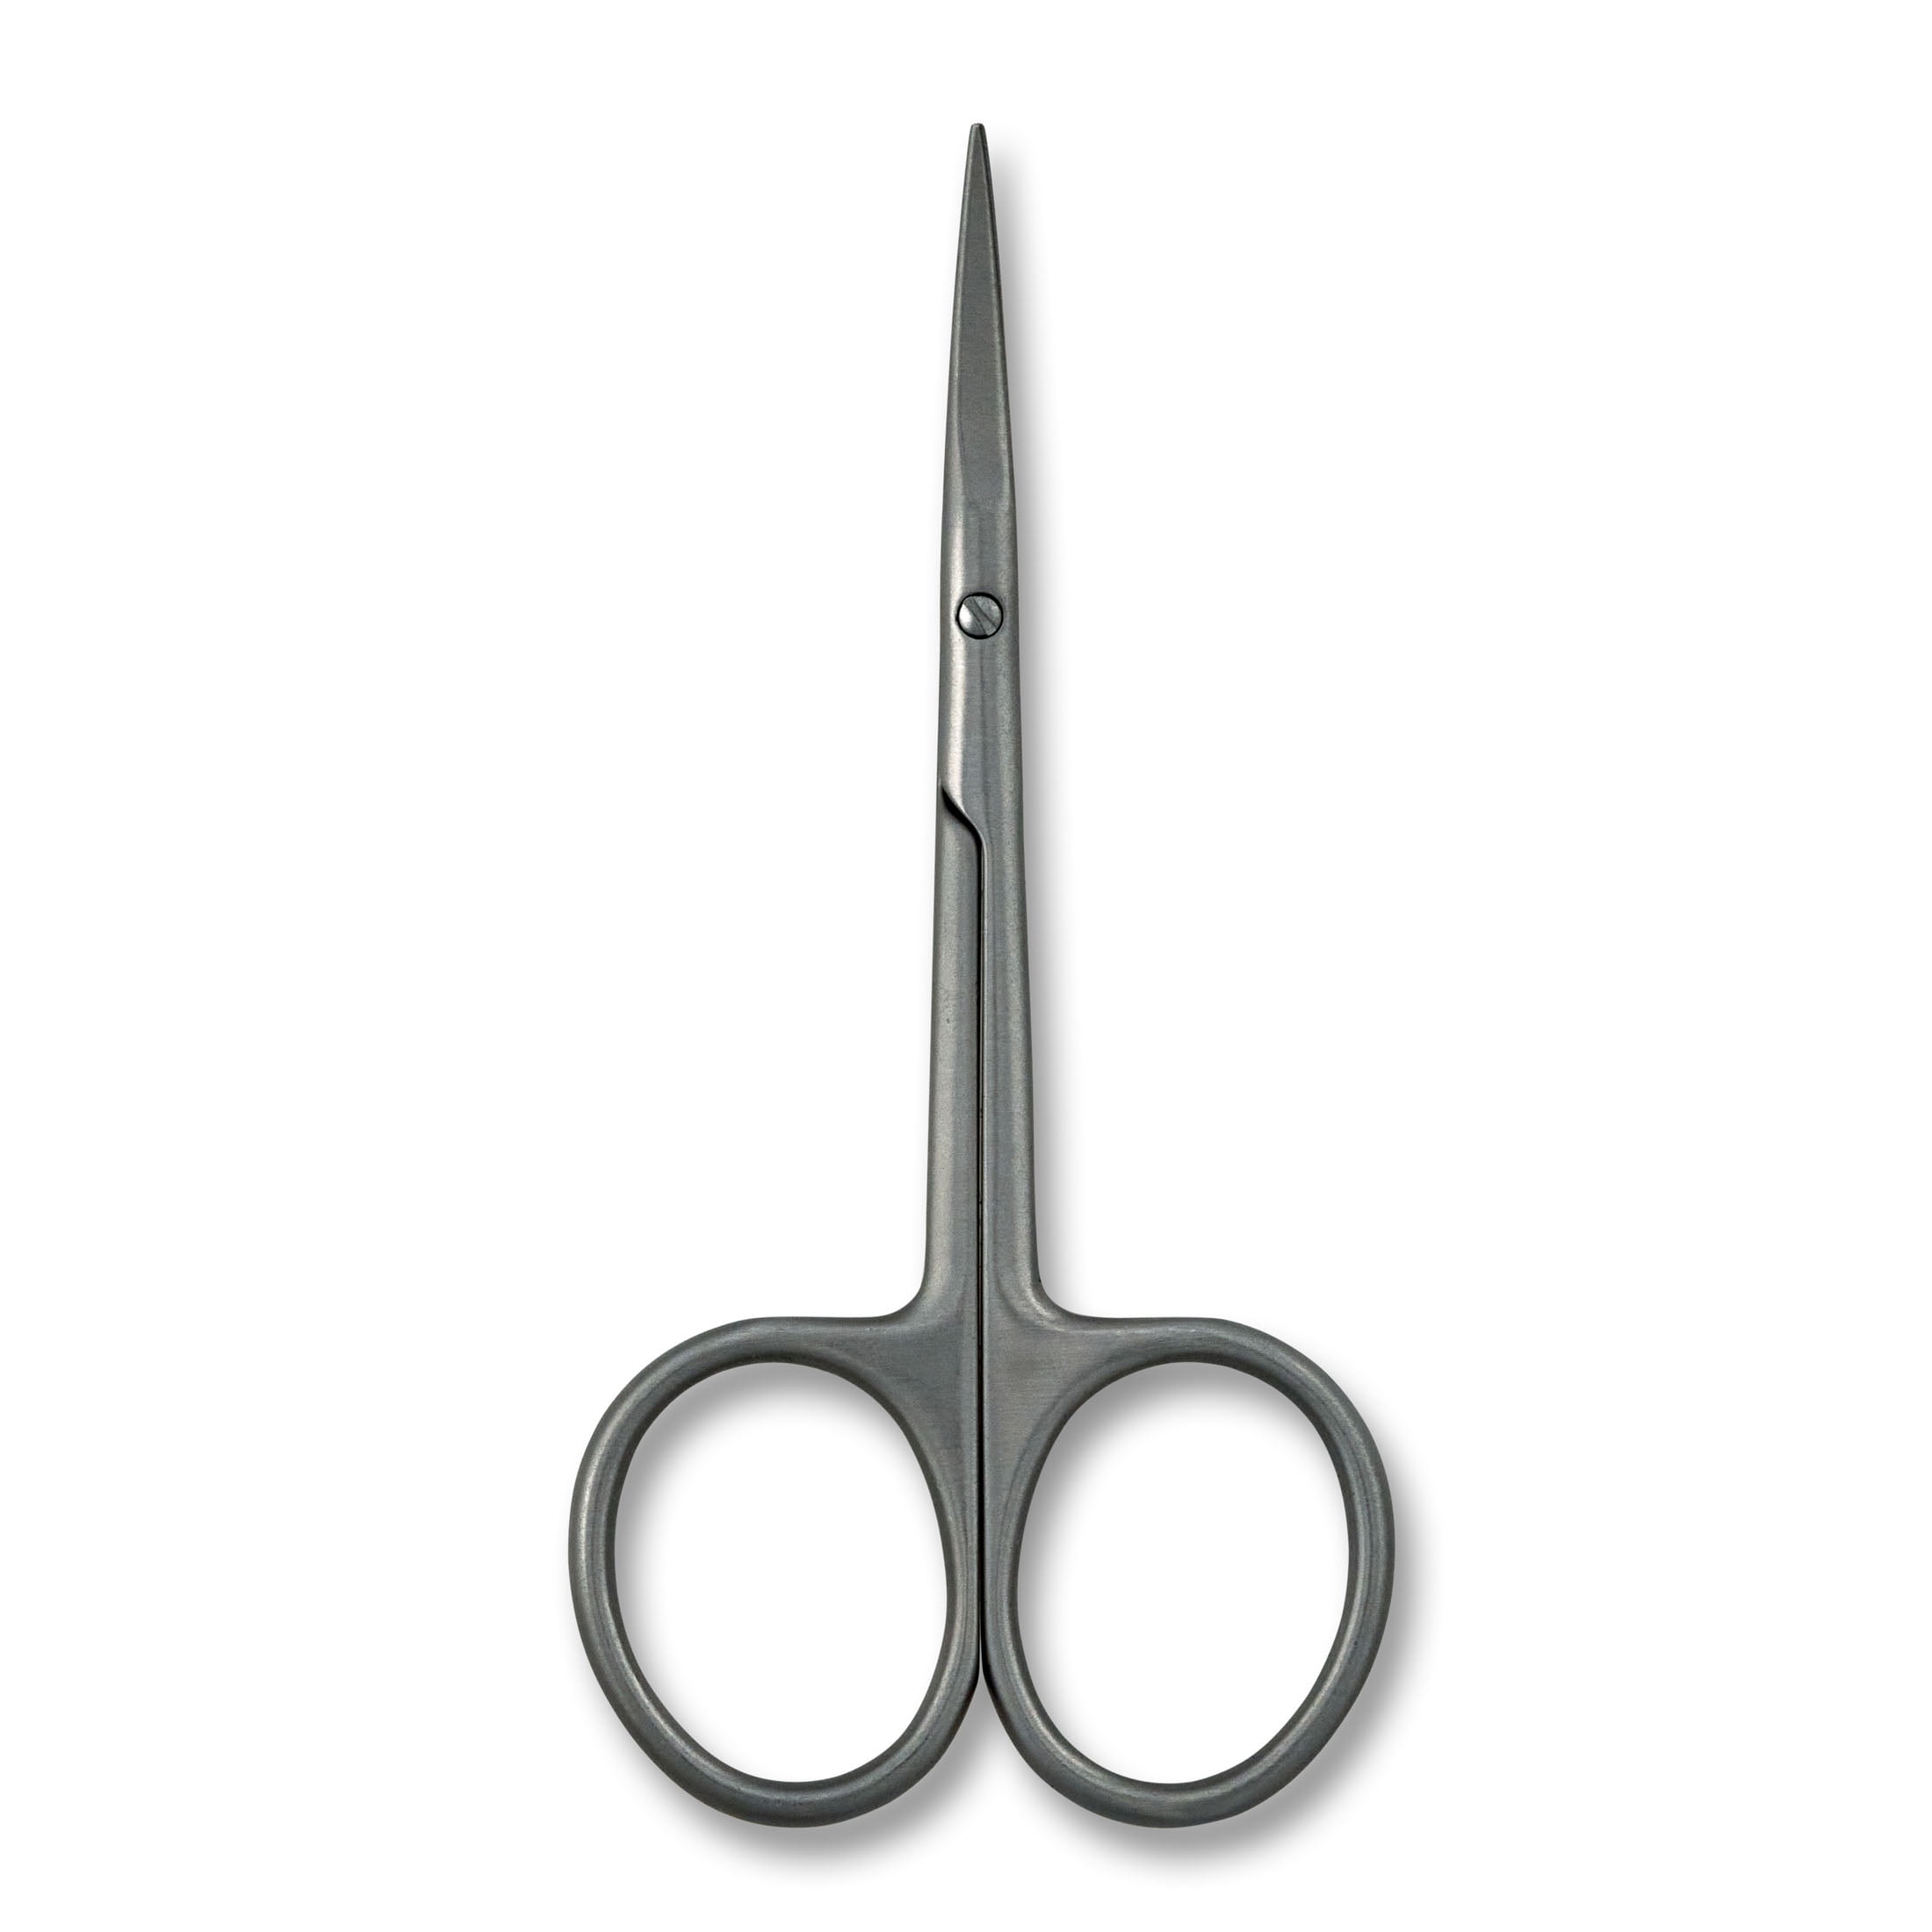  Skin/nail Care Small Scissors in Different Shapes and Sizes.  (Stork Scissor(Gold)) : Beauty & Personal Care